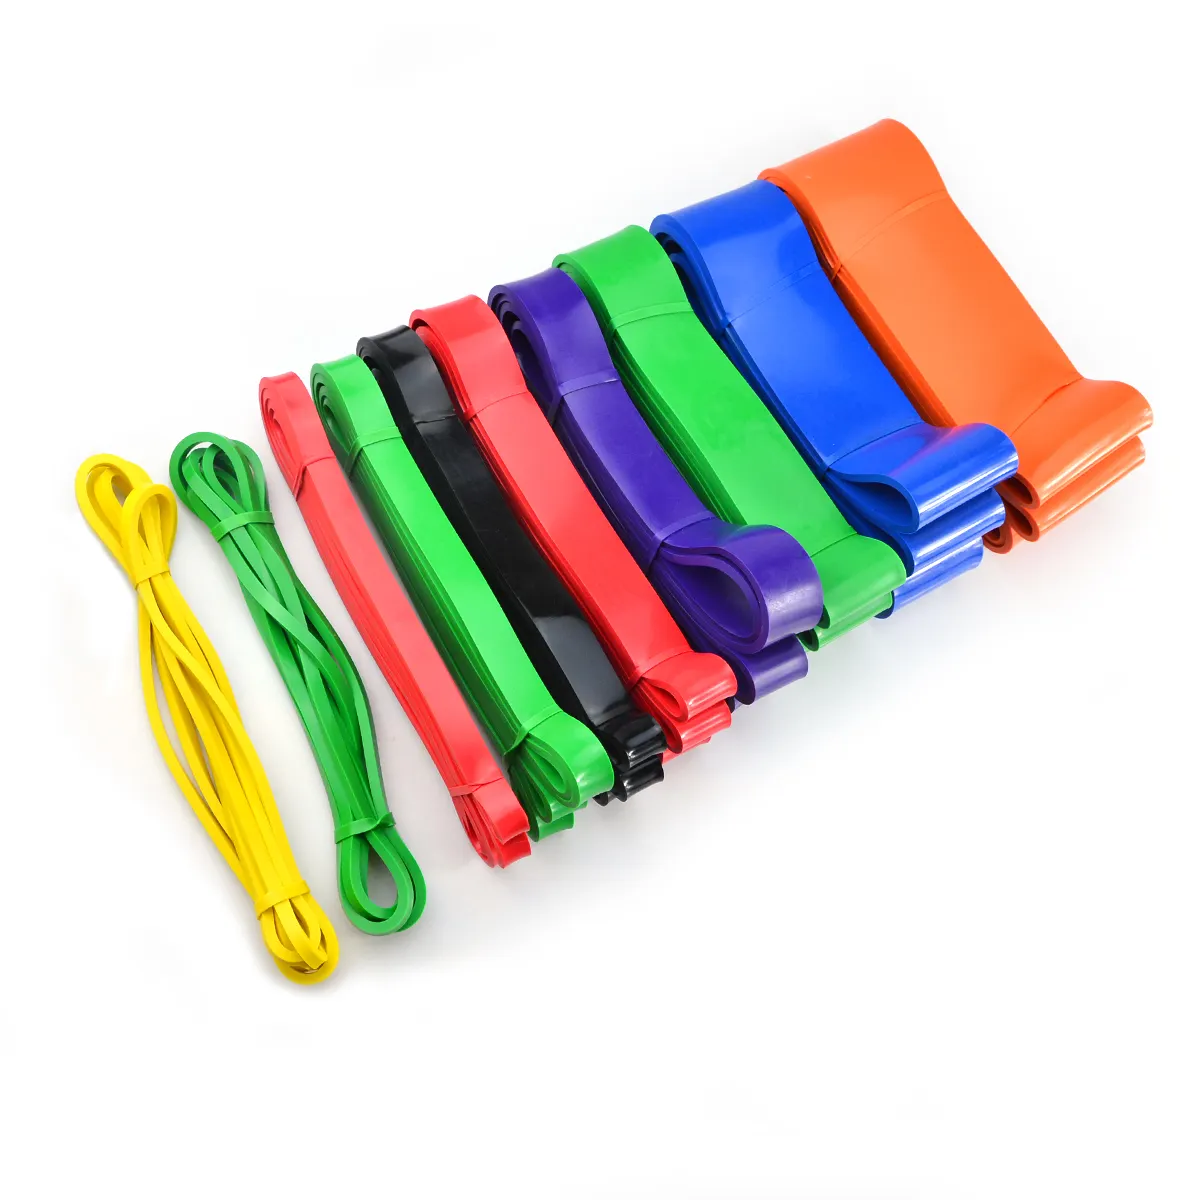 11 Piece Athletic Rubber Tube Straps Wrapped Fitness resistance exercise bands set of 5